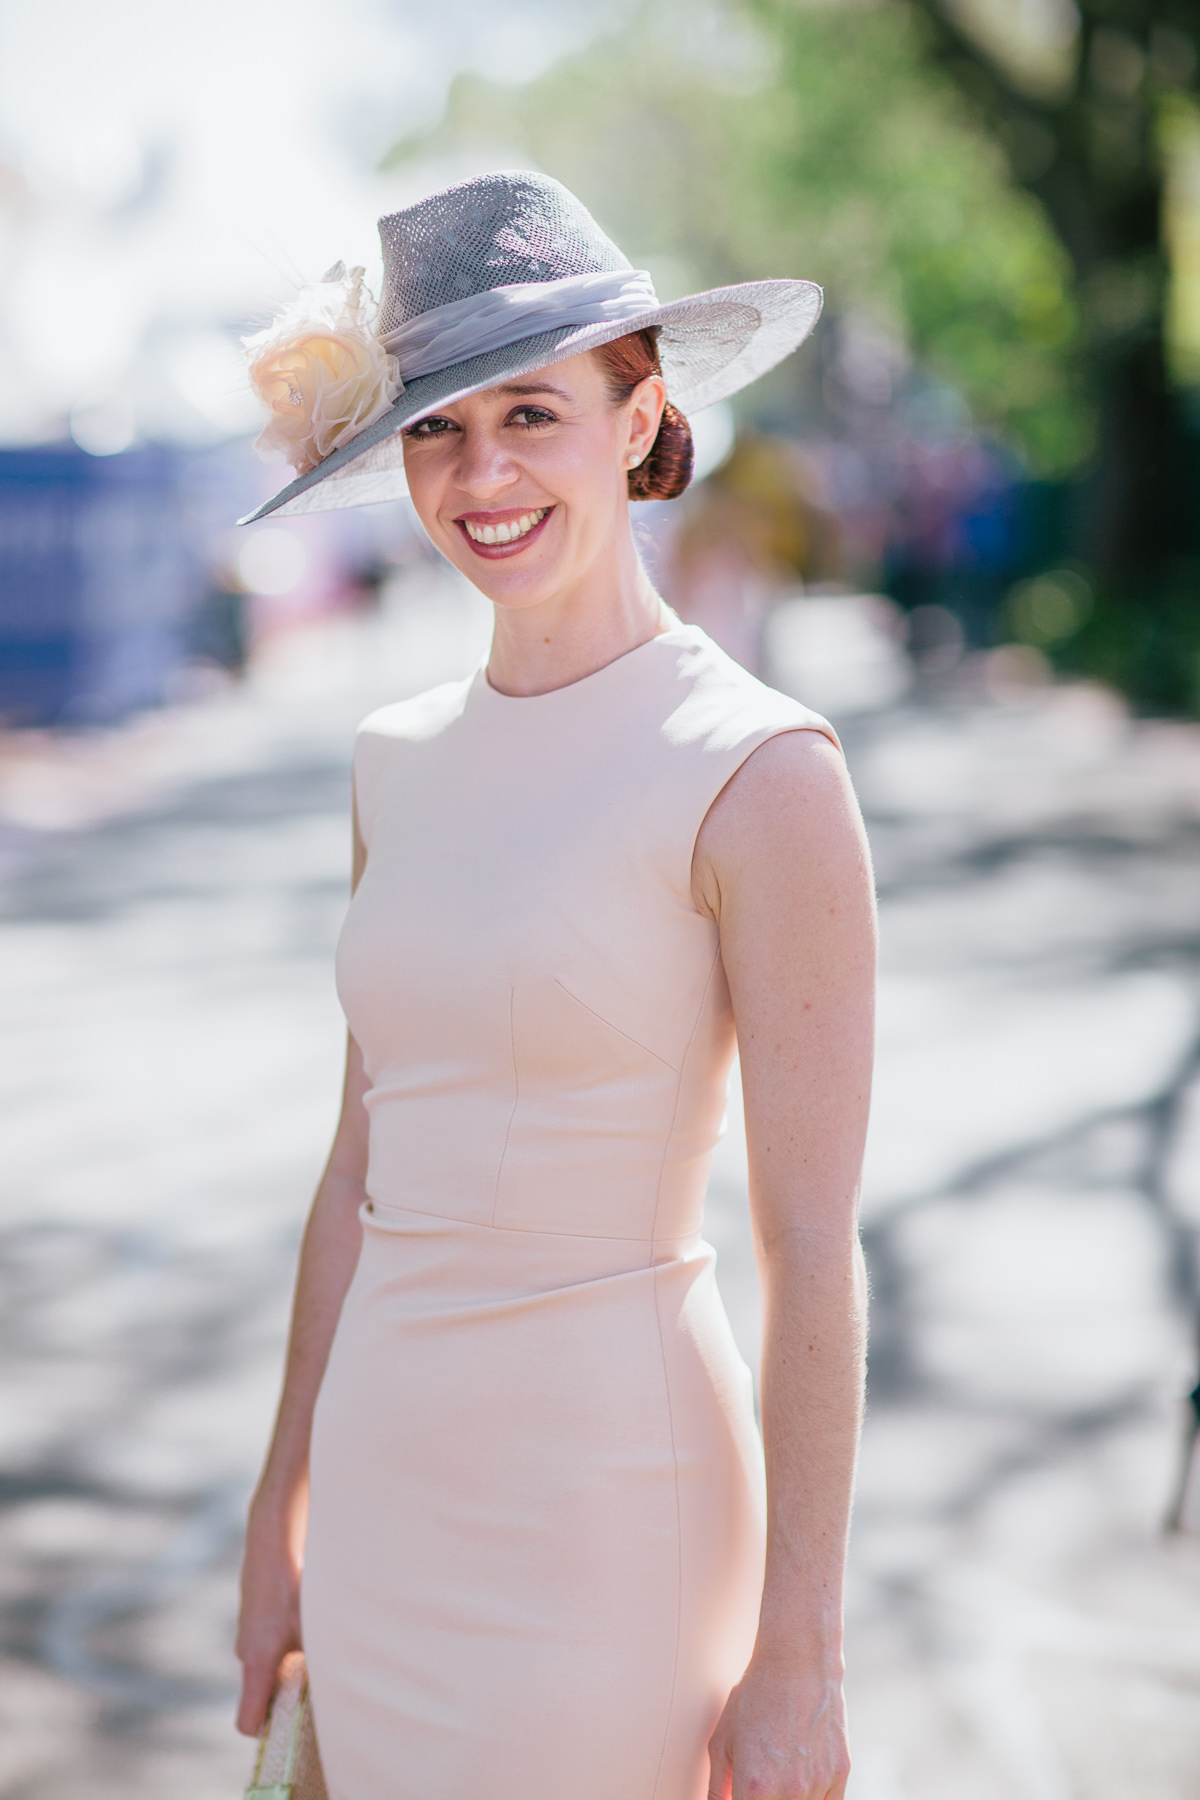 Classic and stylish outfits - spring racing photographs